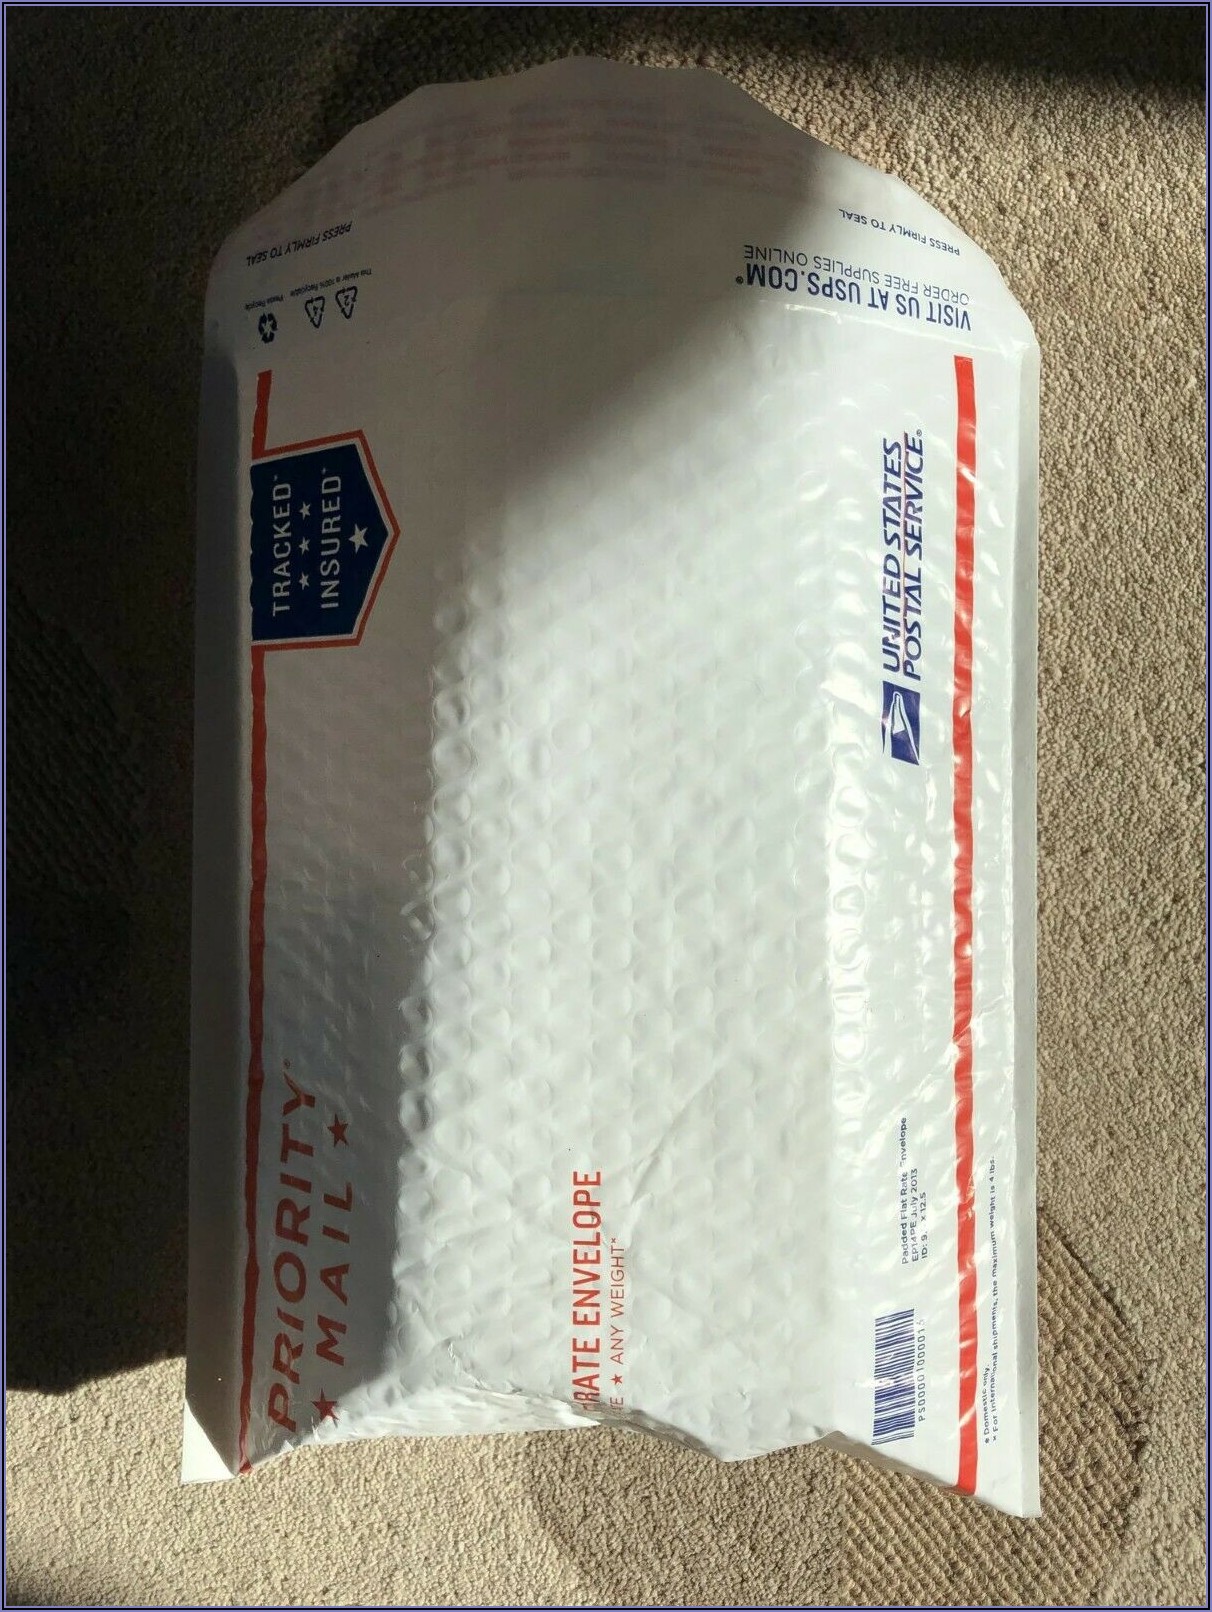 priority mail flat rate padded envelopes